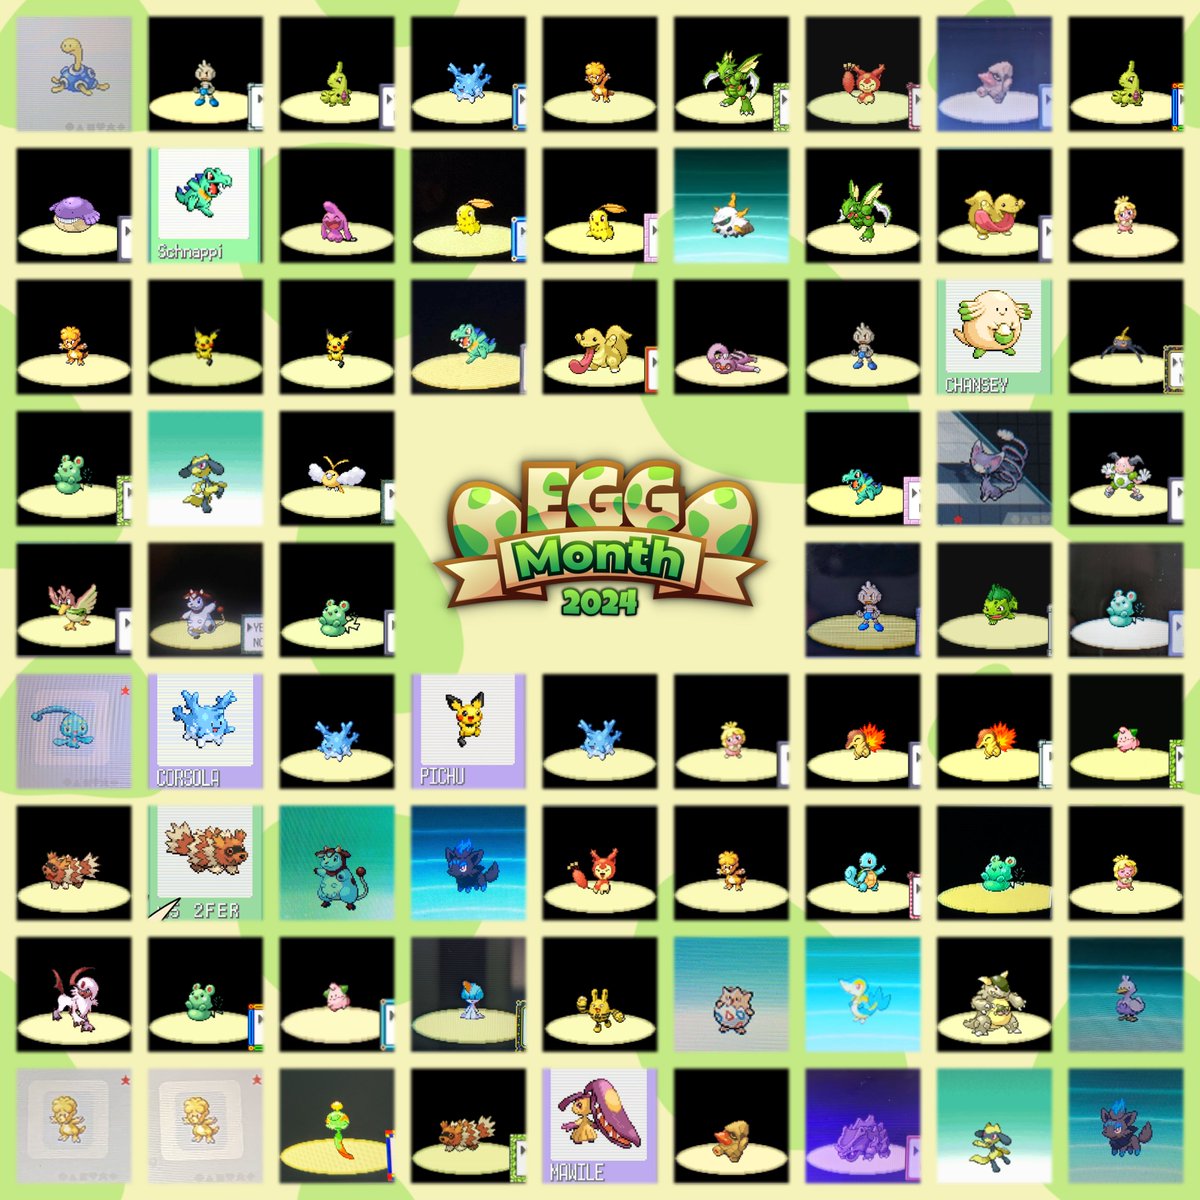 #EggMonth2024 is officially over! Here are all shinies from this year's Egg Month! Congratulations to everyone who found a shiny, and thank you to everyone who was participating. This was by far the biggest Egg Month yet, with a grand total of 75 shinies! See you next year! 🥚✨